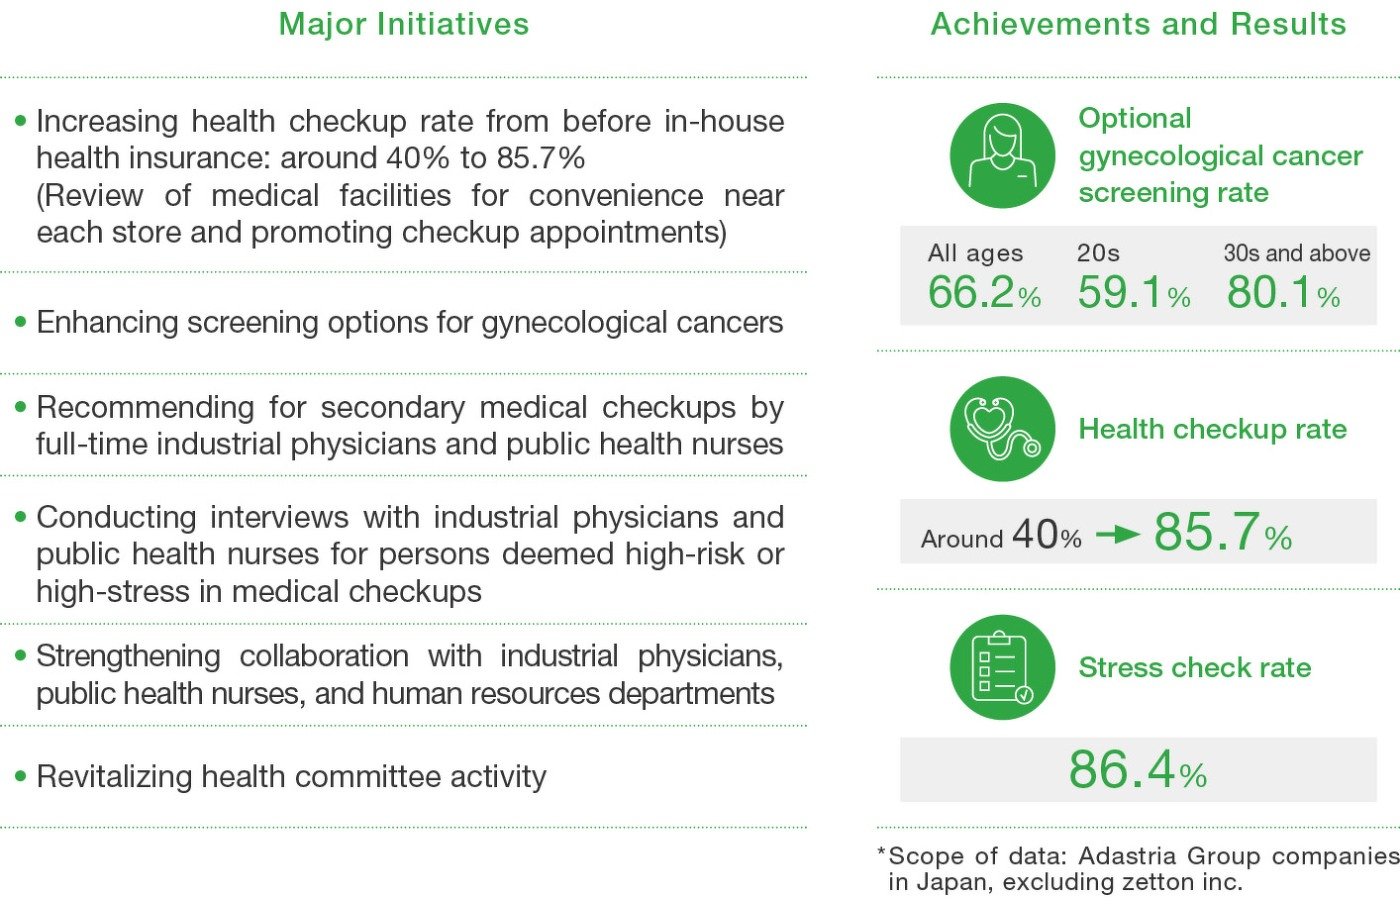 Major Initiatives, Achievements, and Results After Issuance of the Health Management Declaration